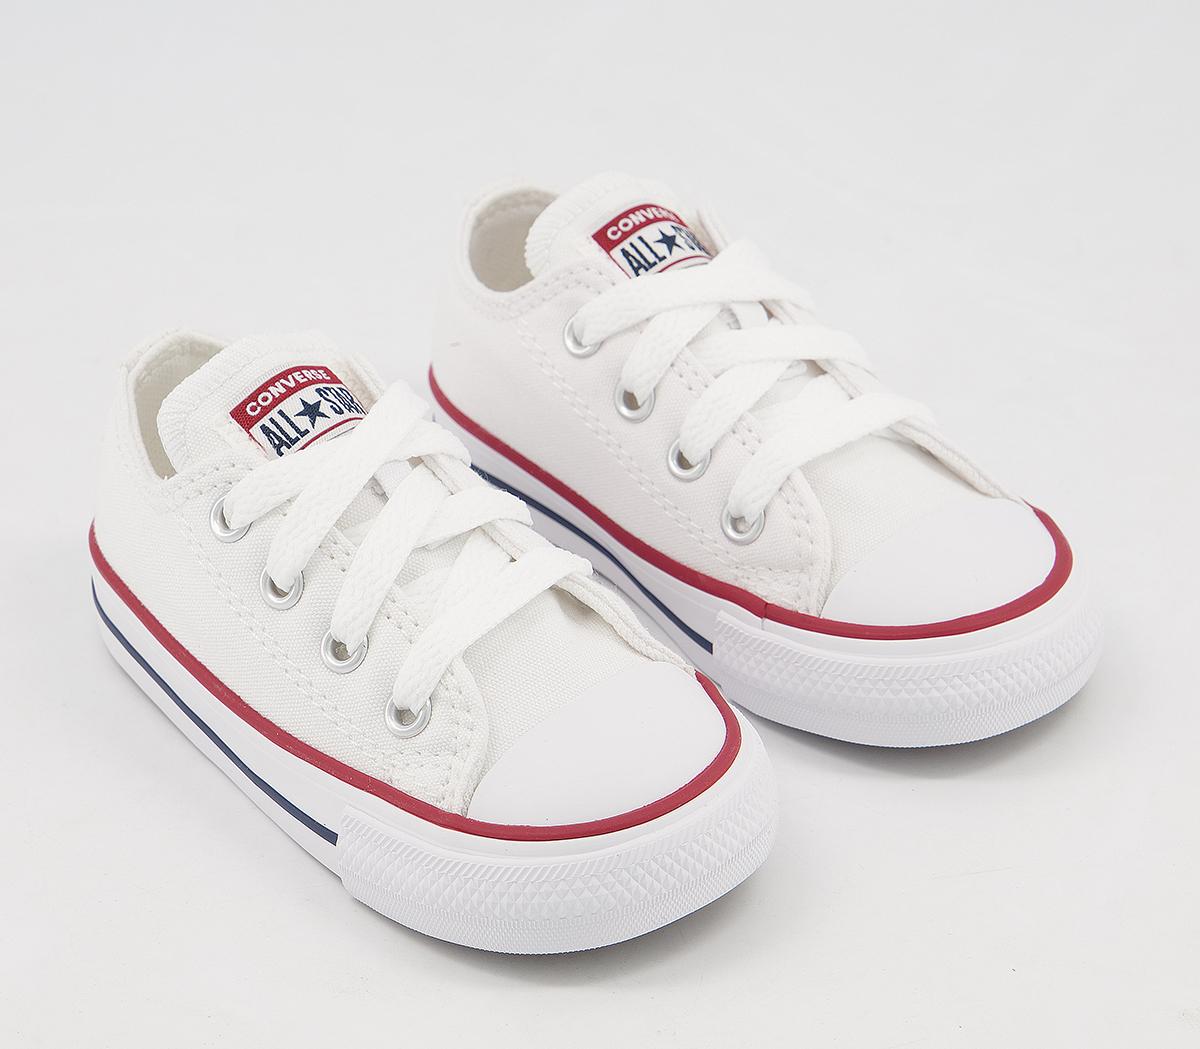 Converse Kids White All Star Low Shoes, 6 Infant